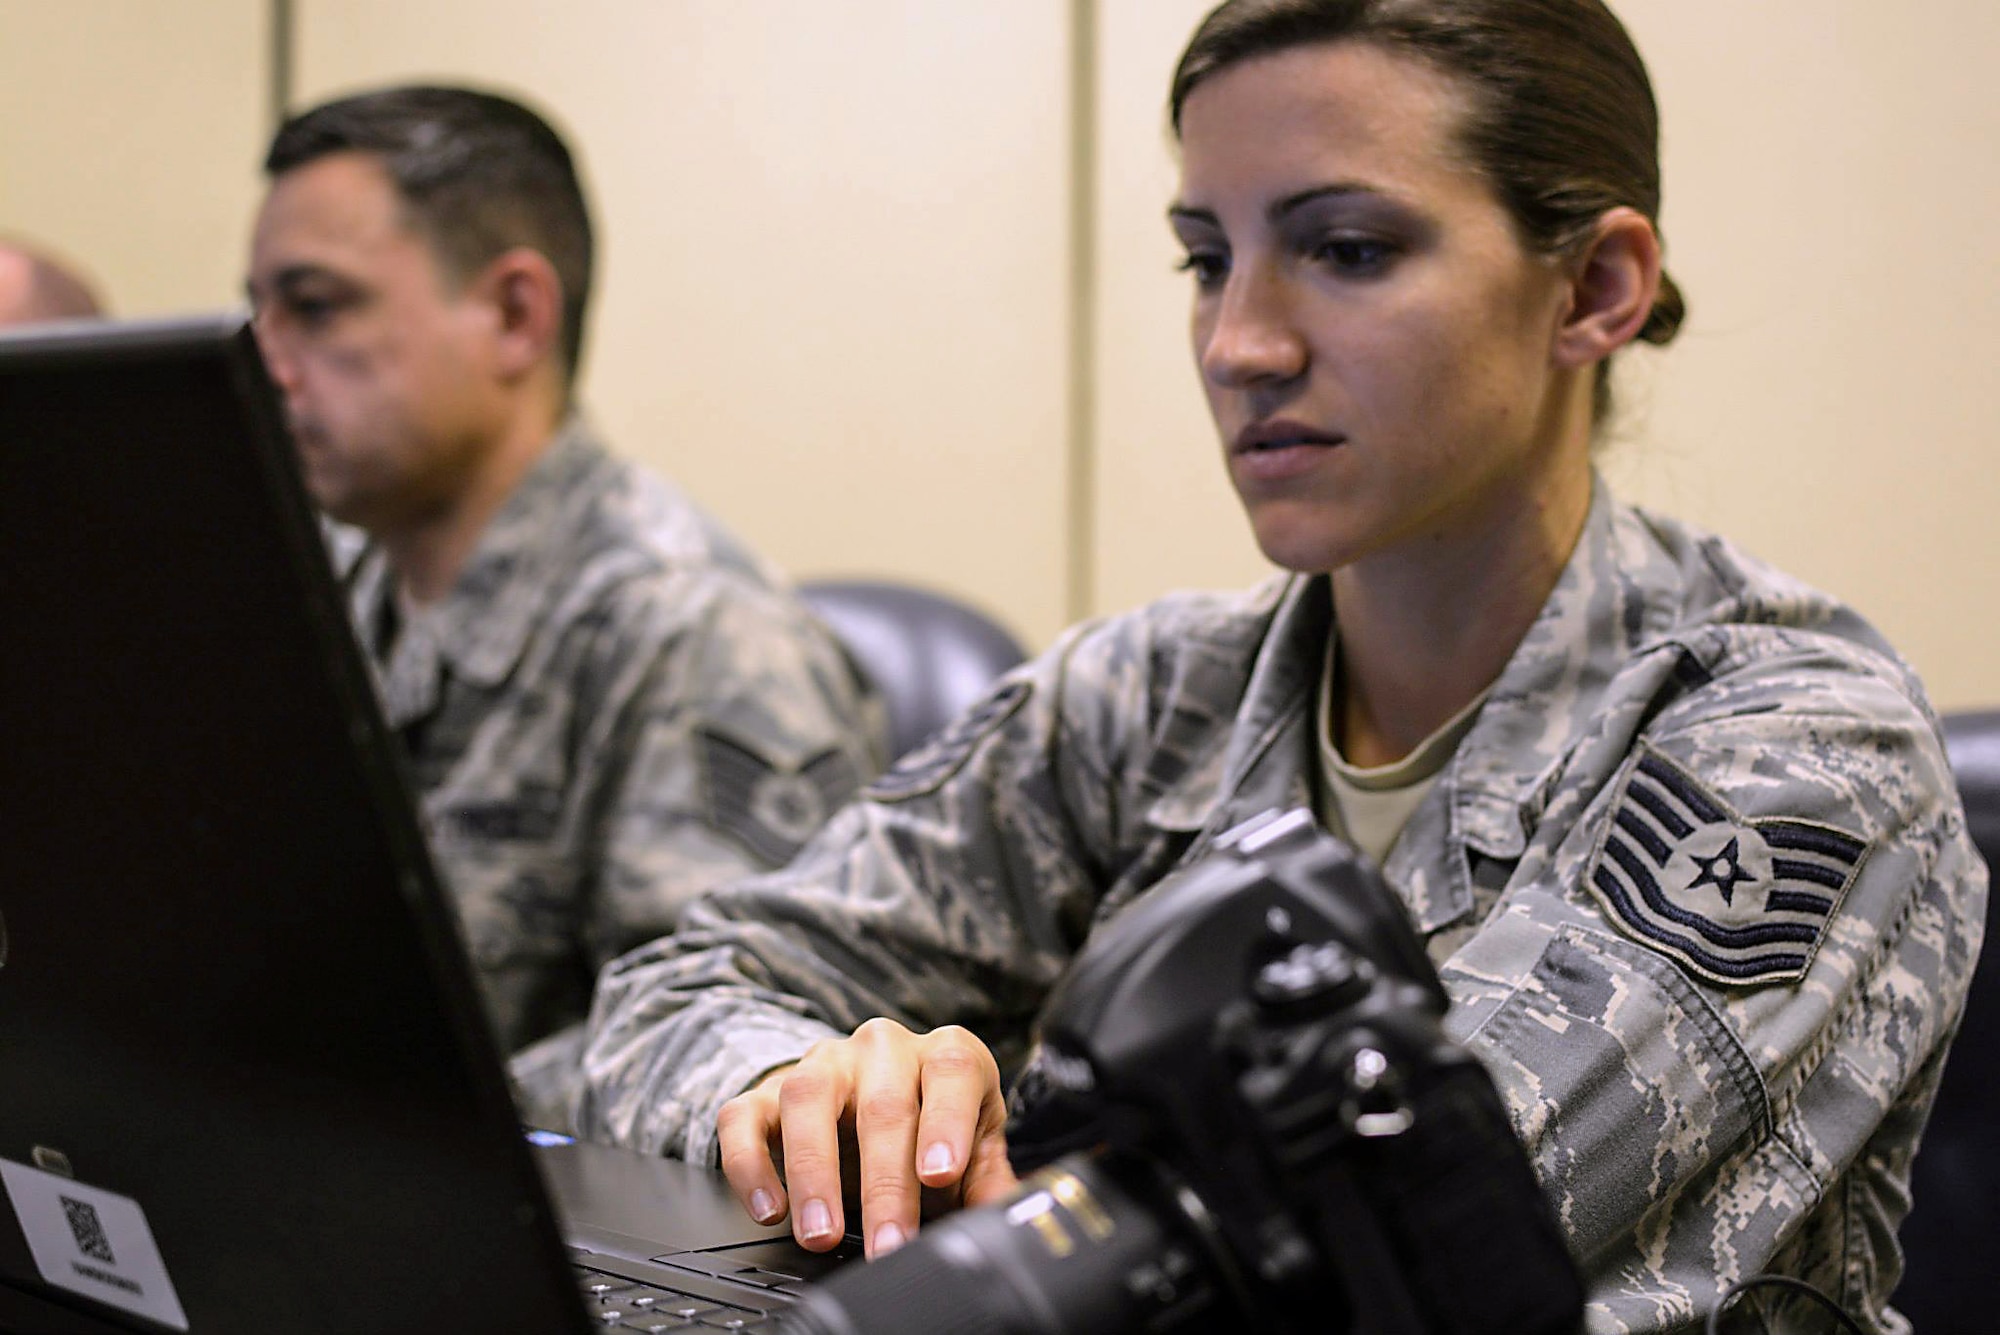 Tech. Sgt. Caroline Hayworth, from 4th Combat Camera Squadron at March Air Reserve Base, Calif., downloads photos she took during  a training course with the 1st Combat Camera Squadron this week. About 23 Air Force Reserve public affairs specialists from bases across the country showed up at Joint Base Charleston with an eagerness to improve their photo skills under the tutelage of some of the Air Force’s most elite photographers – 1st Combat Camera Airmen. (U.S. Air Force Reserve photo by Tech. Sgt. Shane Ellis)